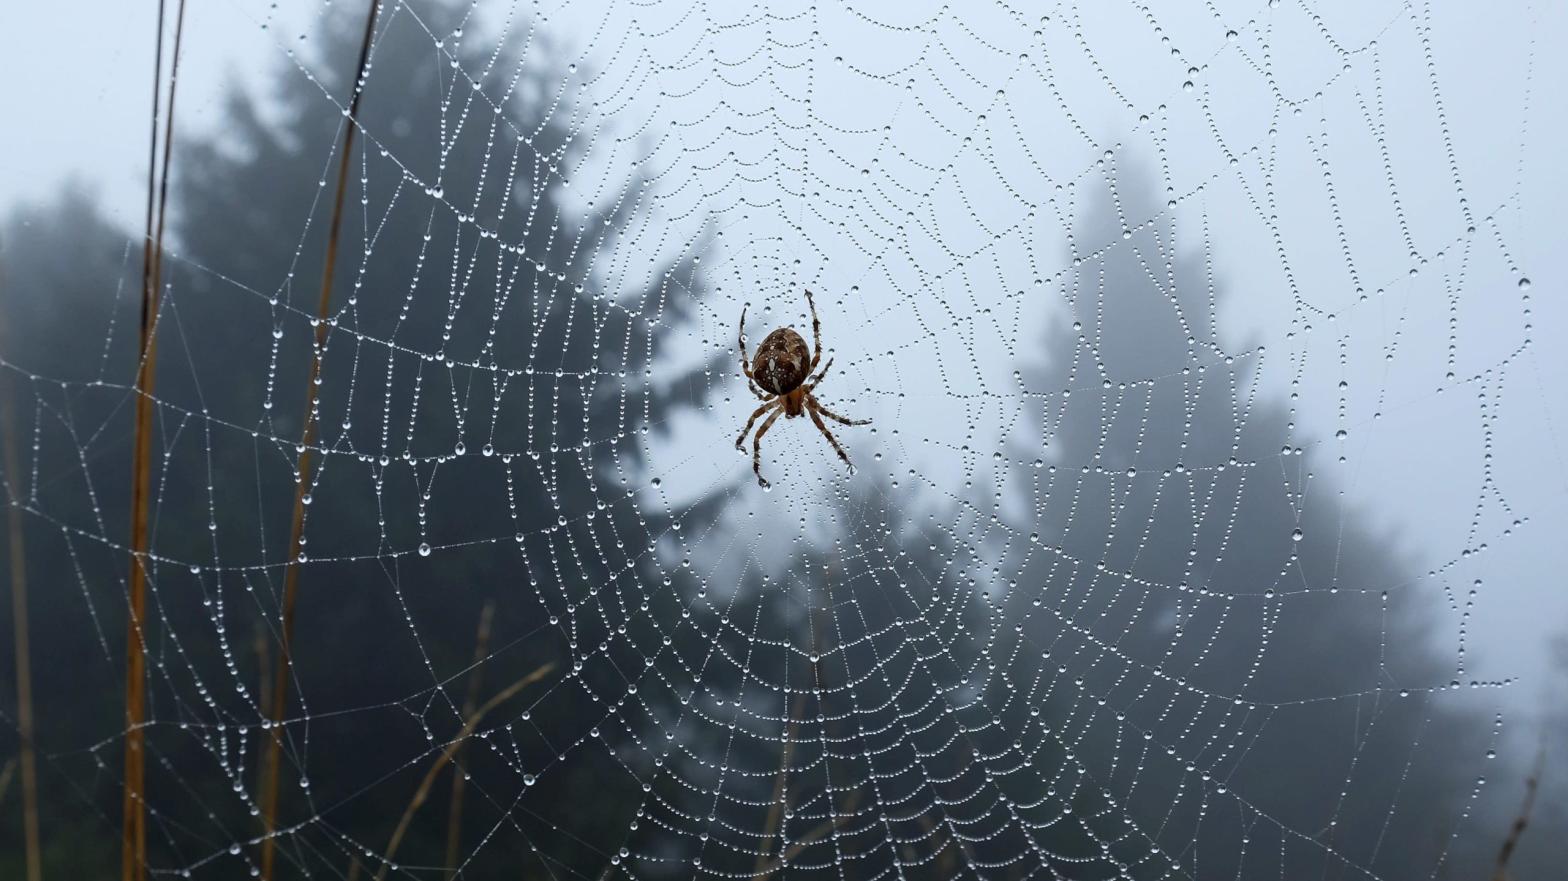 Spiders read their environment by sensing vibrations with their hairy legs. (Photo: UWE ZUCCHI/DPA/AFP via Getty Images, Getty Images)